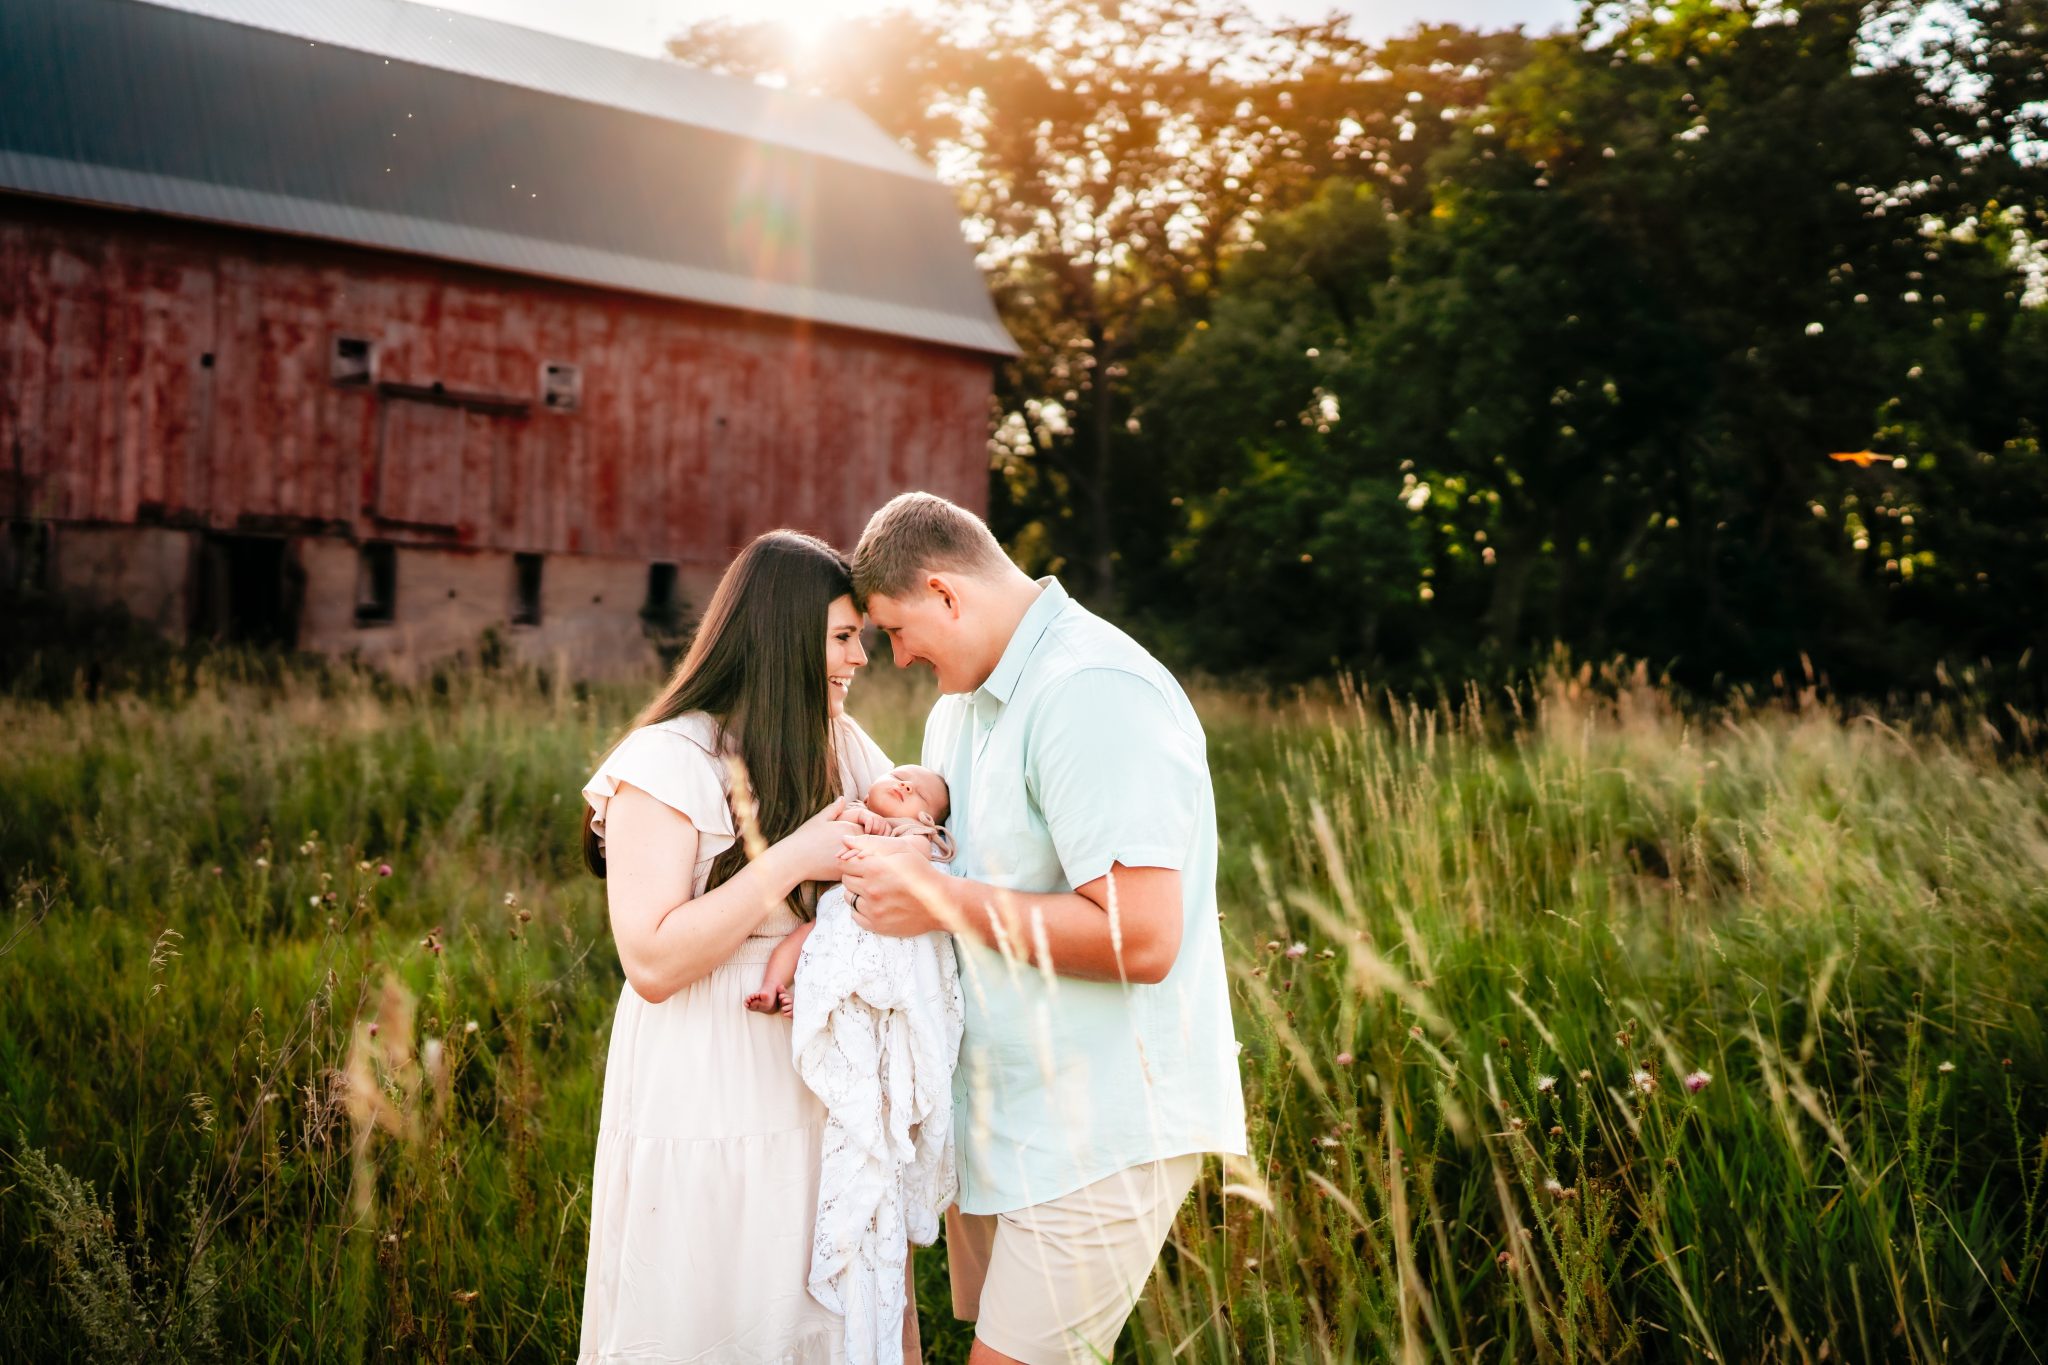 Spirit and Soul Photography is an Alexandria MN photographer specializing in family and portrait photography.